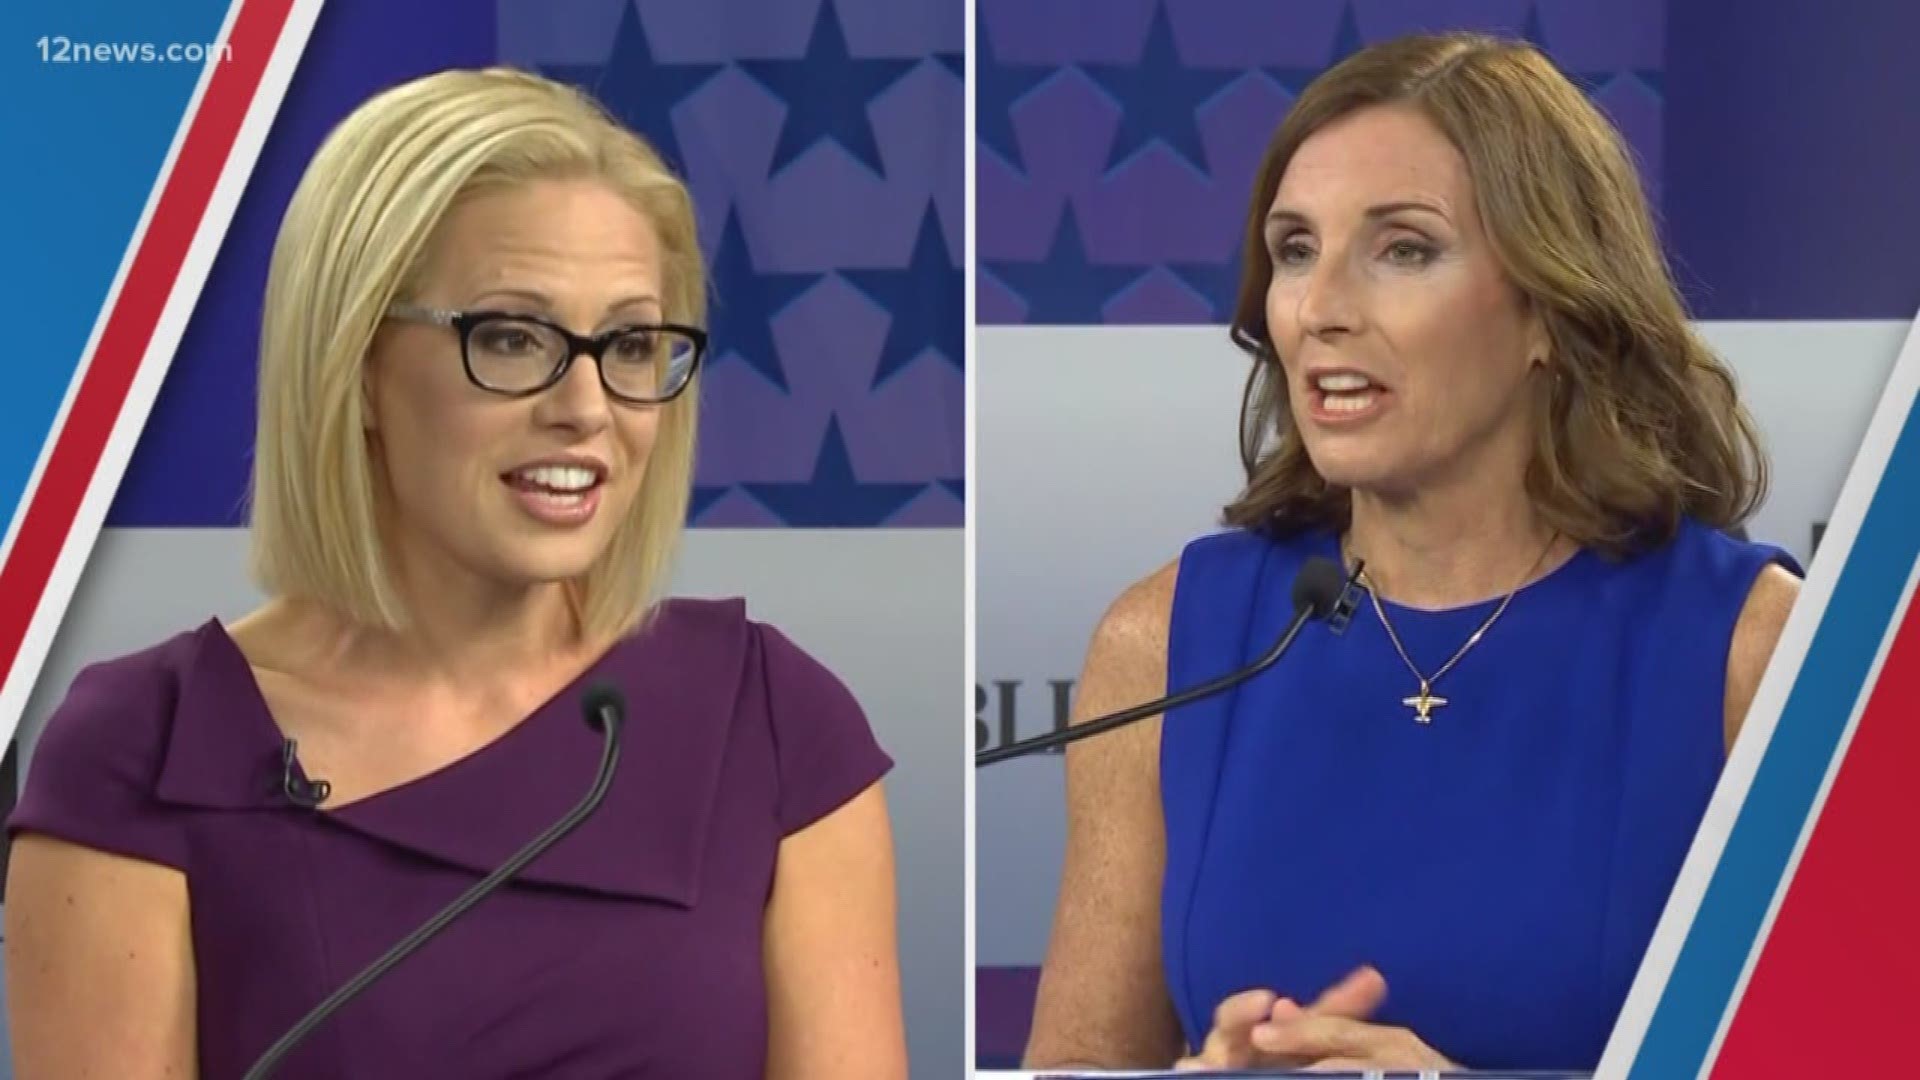 Kyrsten Sinema and Martha McSally fought a long, hard battle to become Arizona's first female Senator. We take a look back at the campaigns they ran to get where they both are today.